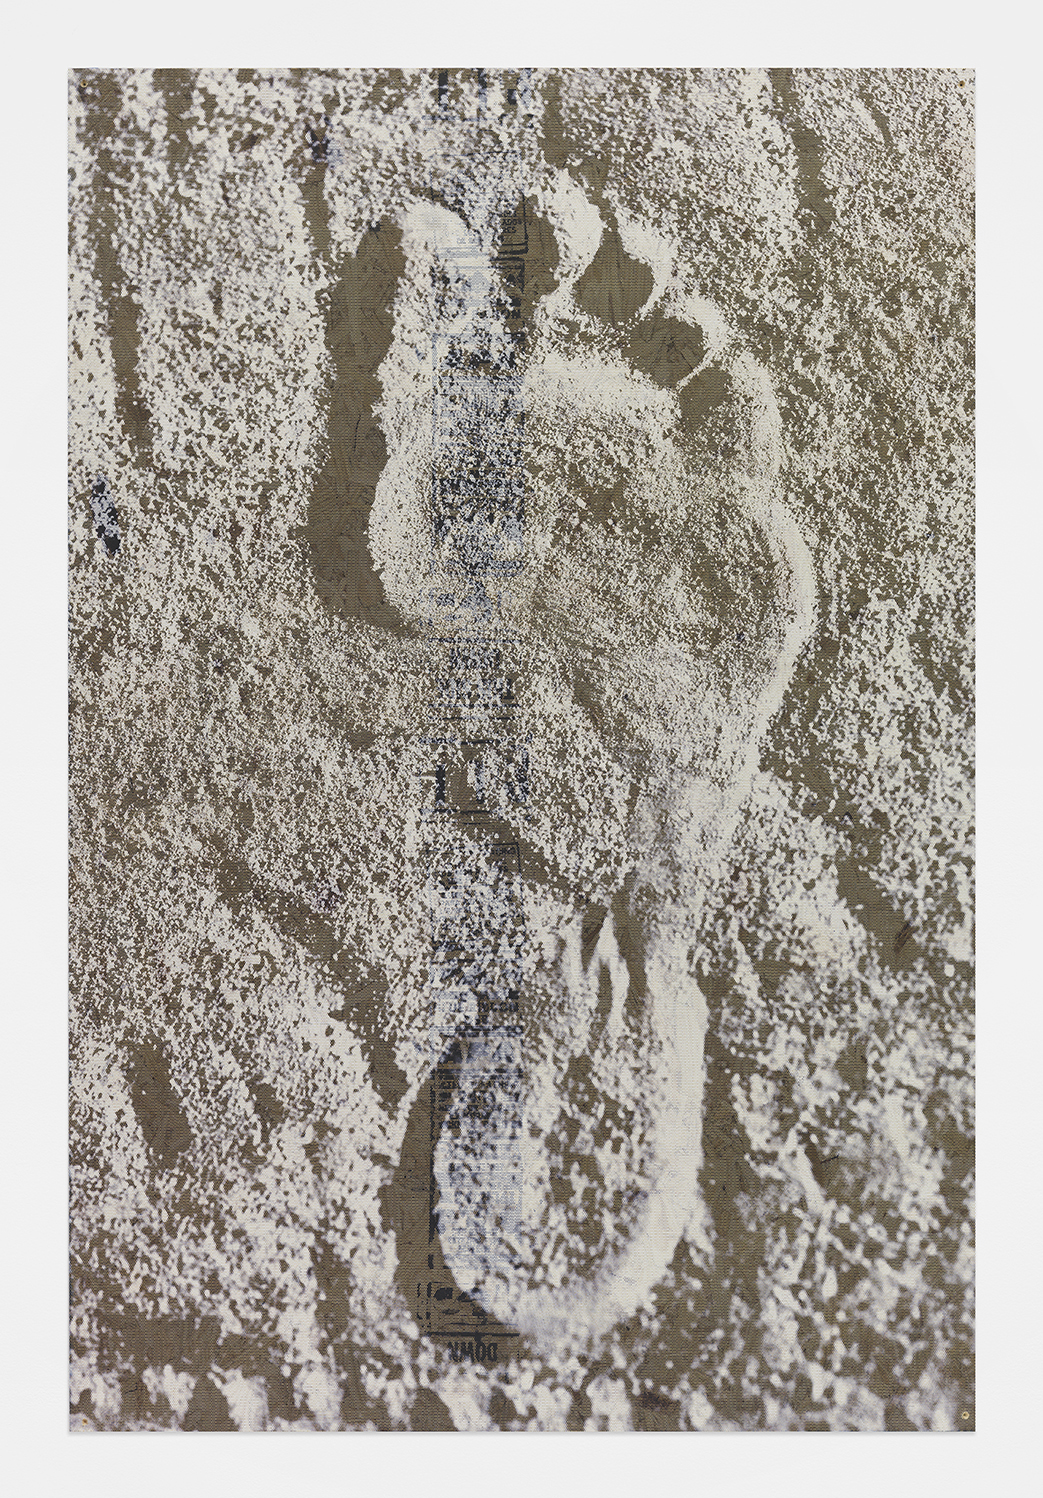 Shoes are foot prisons<br>4' x 6'<br>2014